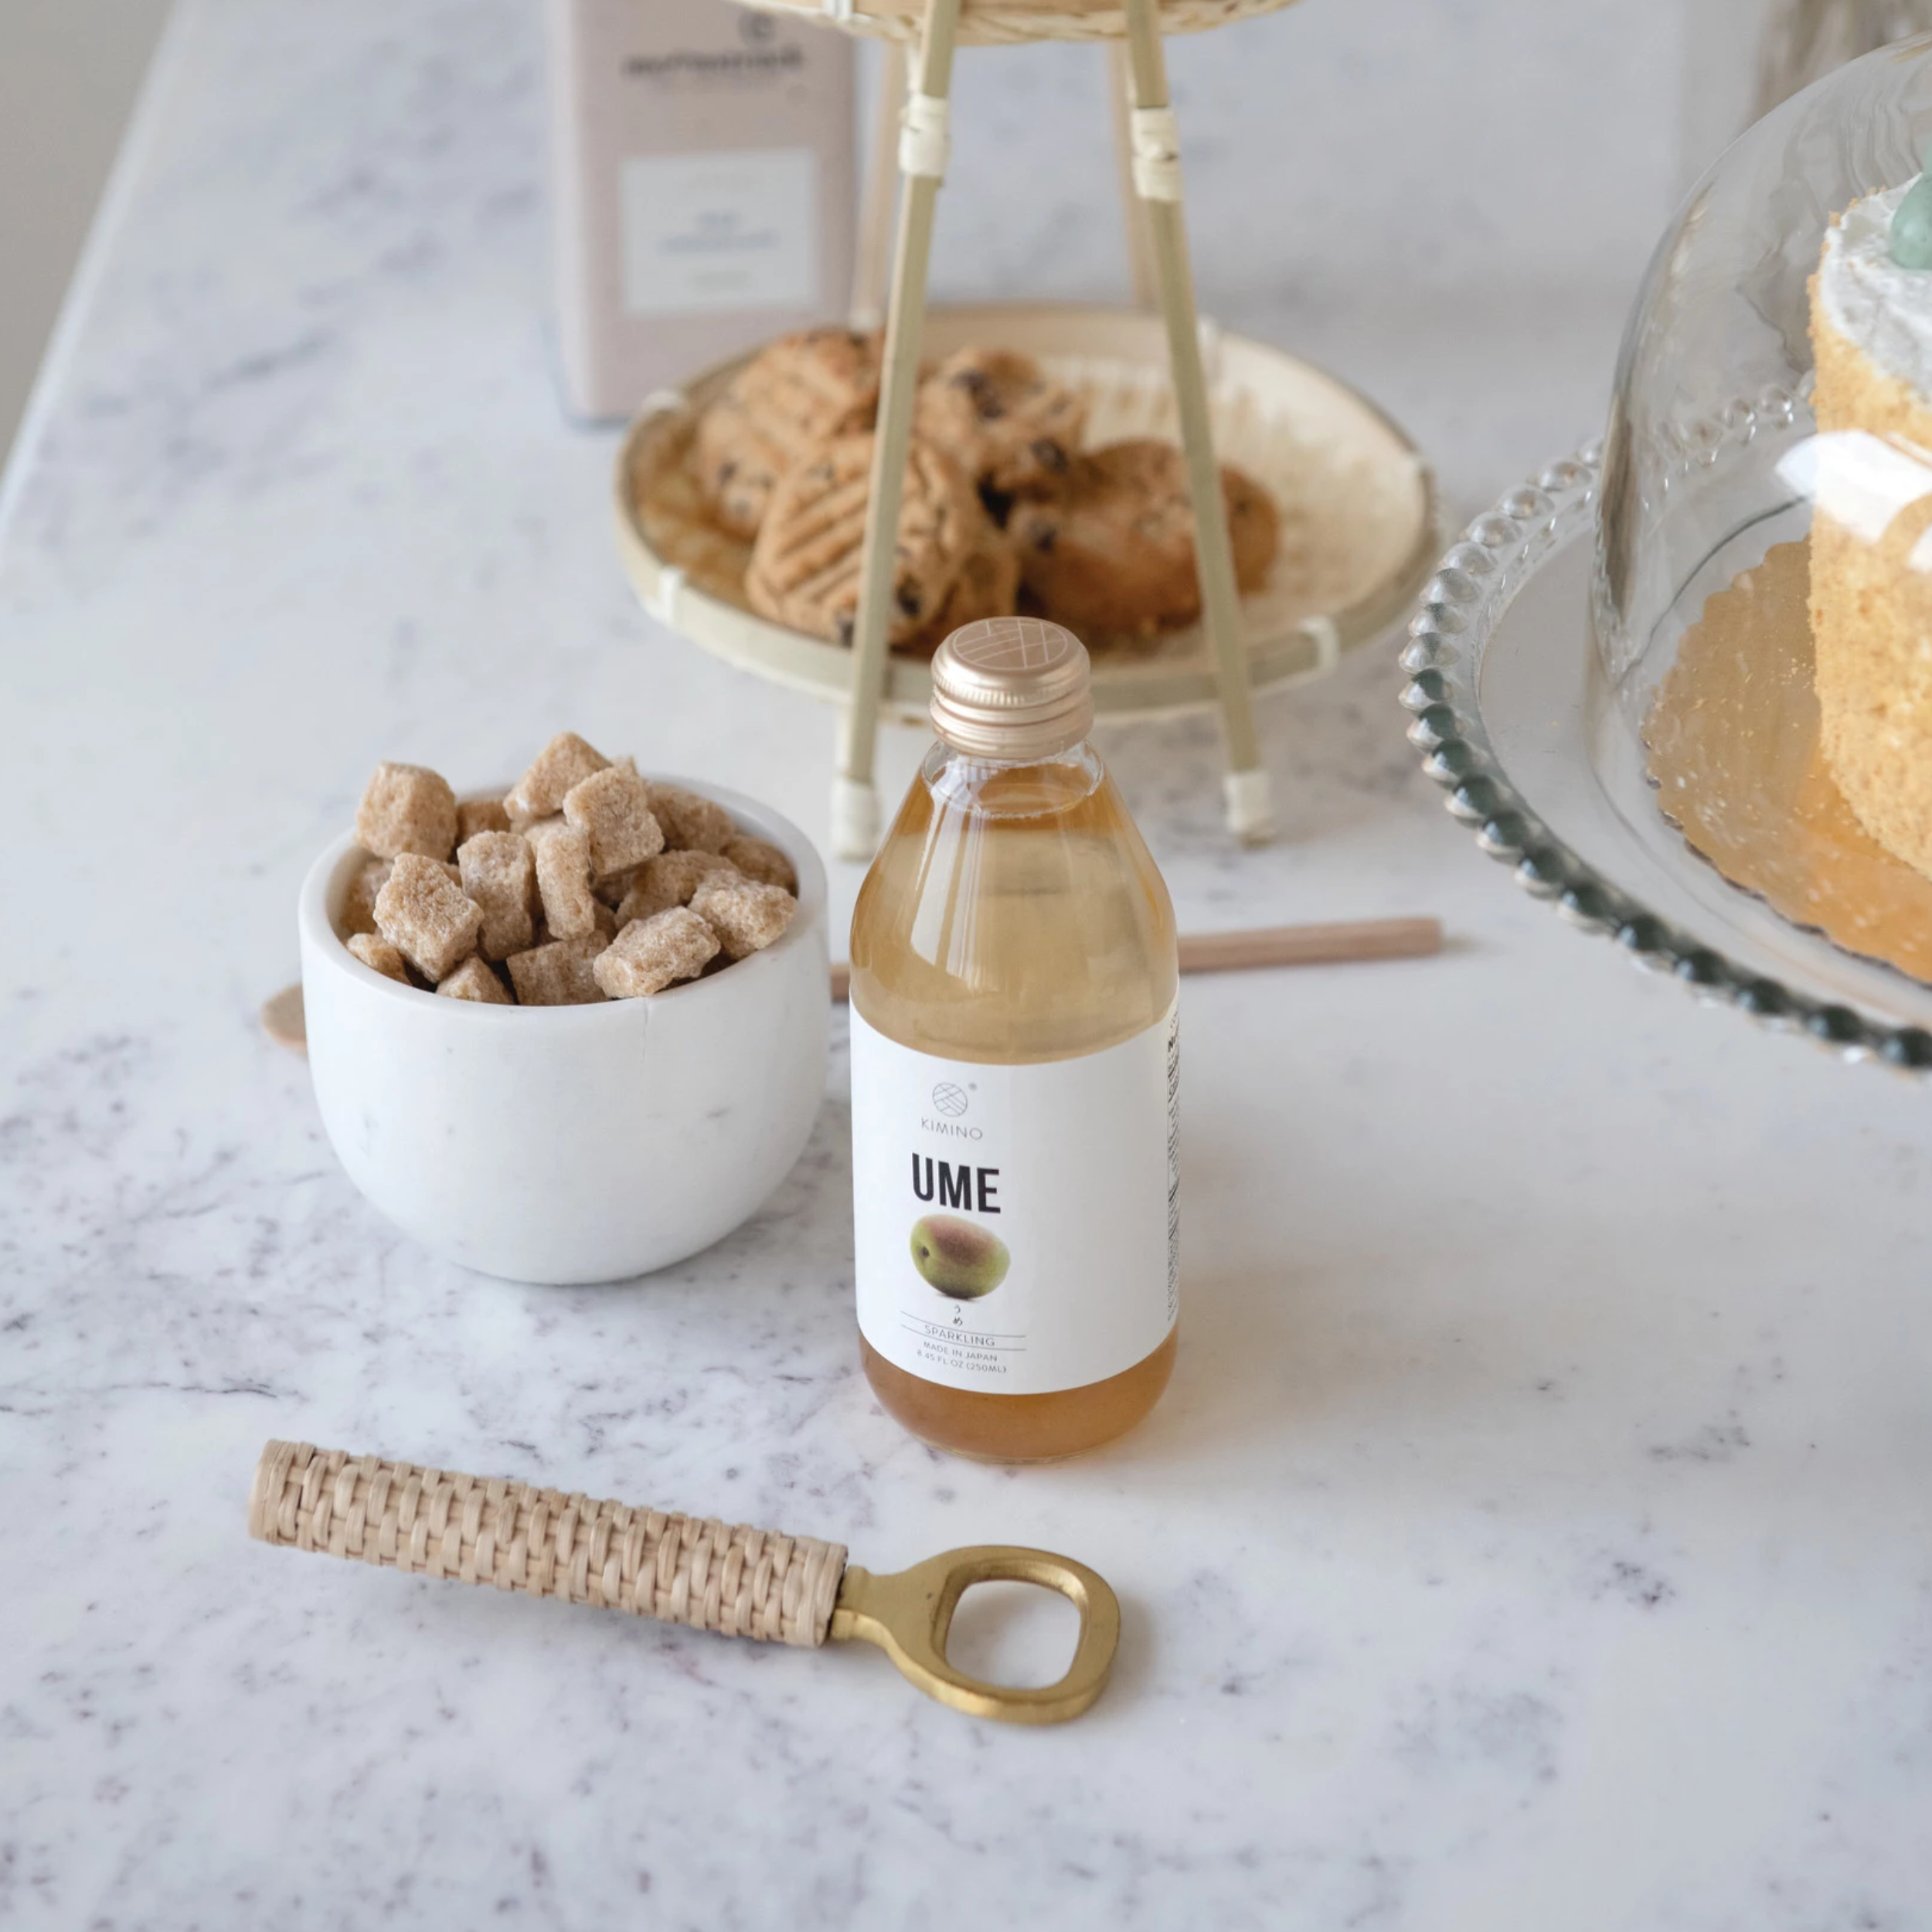 marble counter with plate with cookies and cake on background. in front is a bowl with sugar chunks, a bottle of ume and gold and rattan wrapped bottle opener 